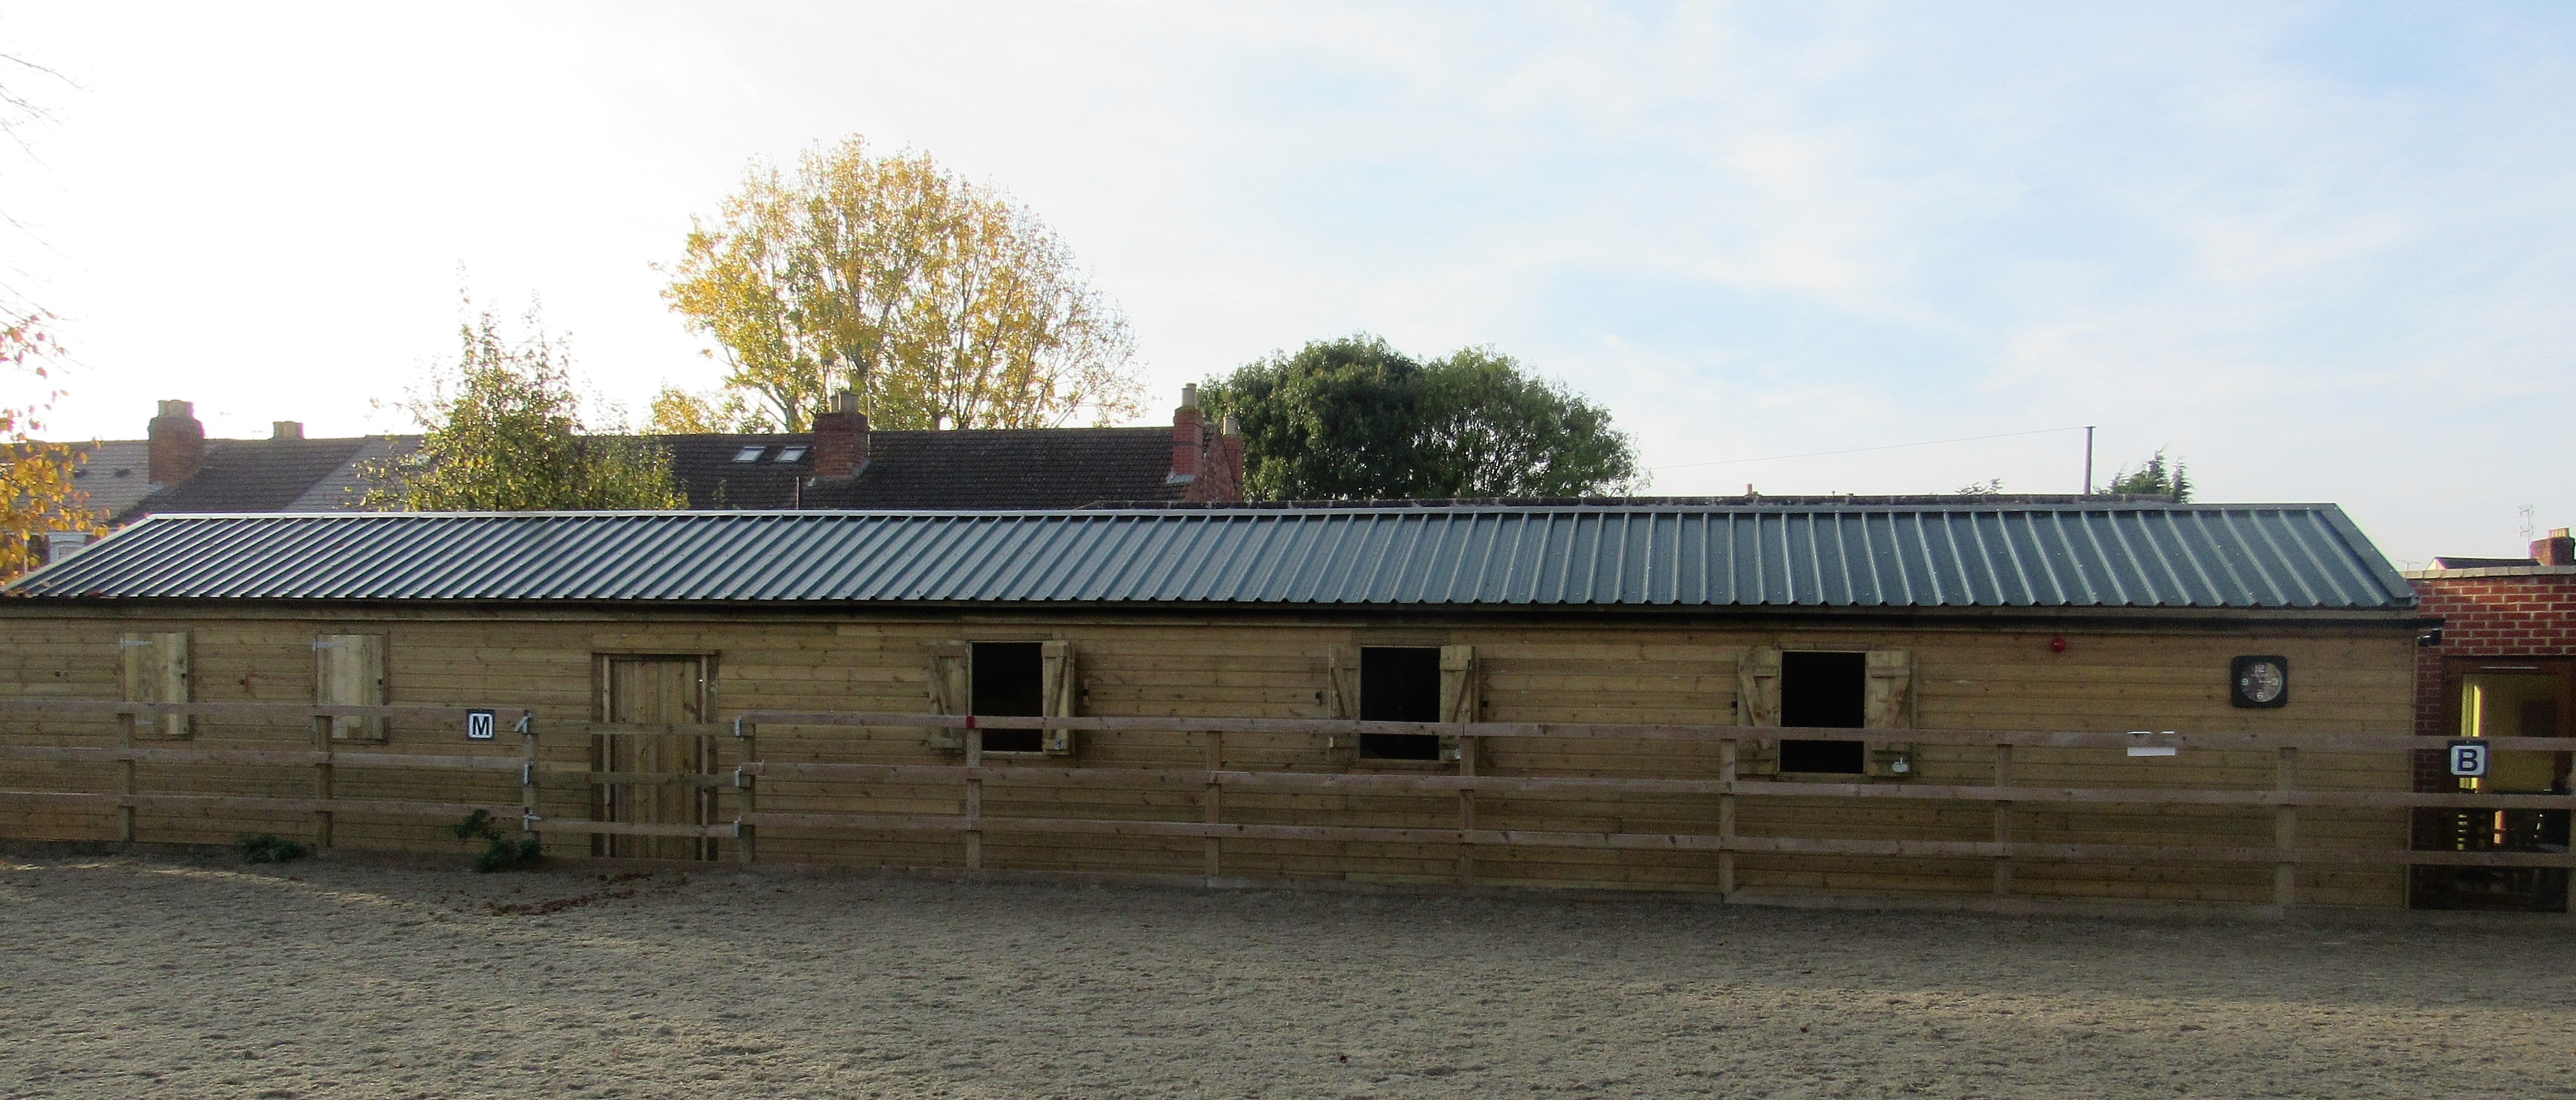 Completed Stables